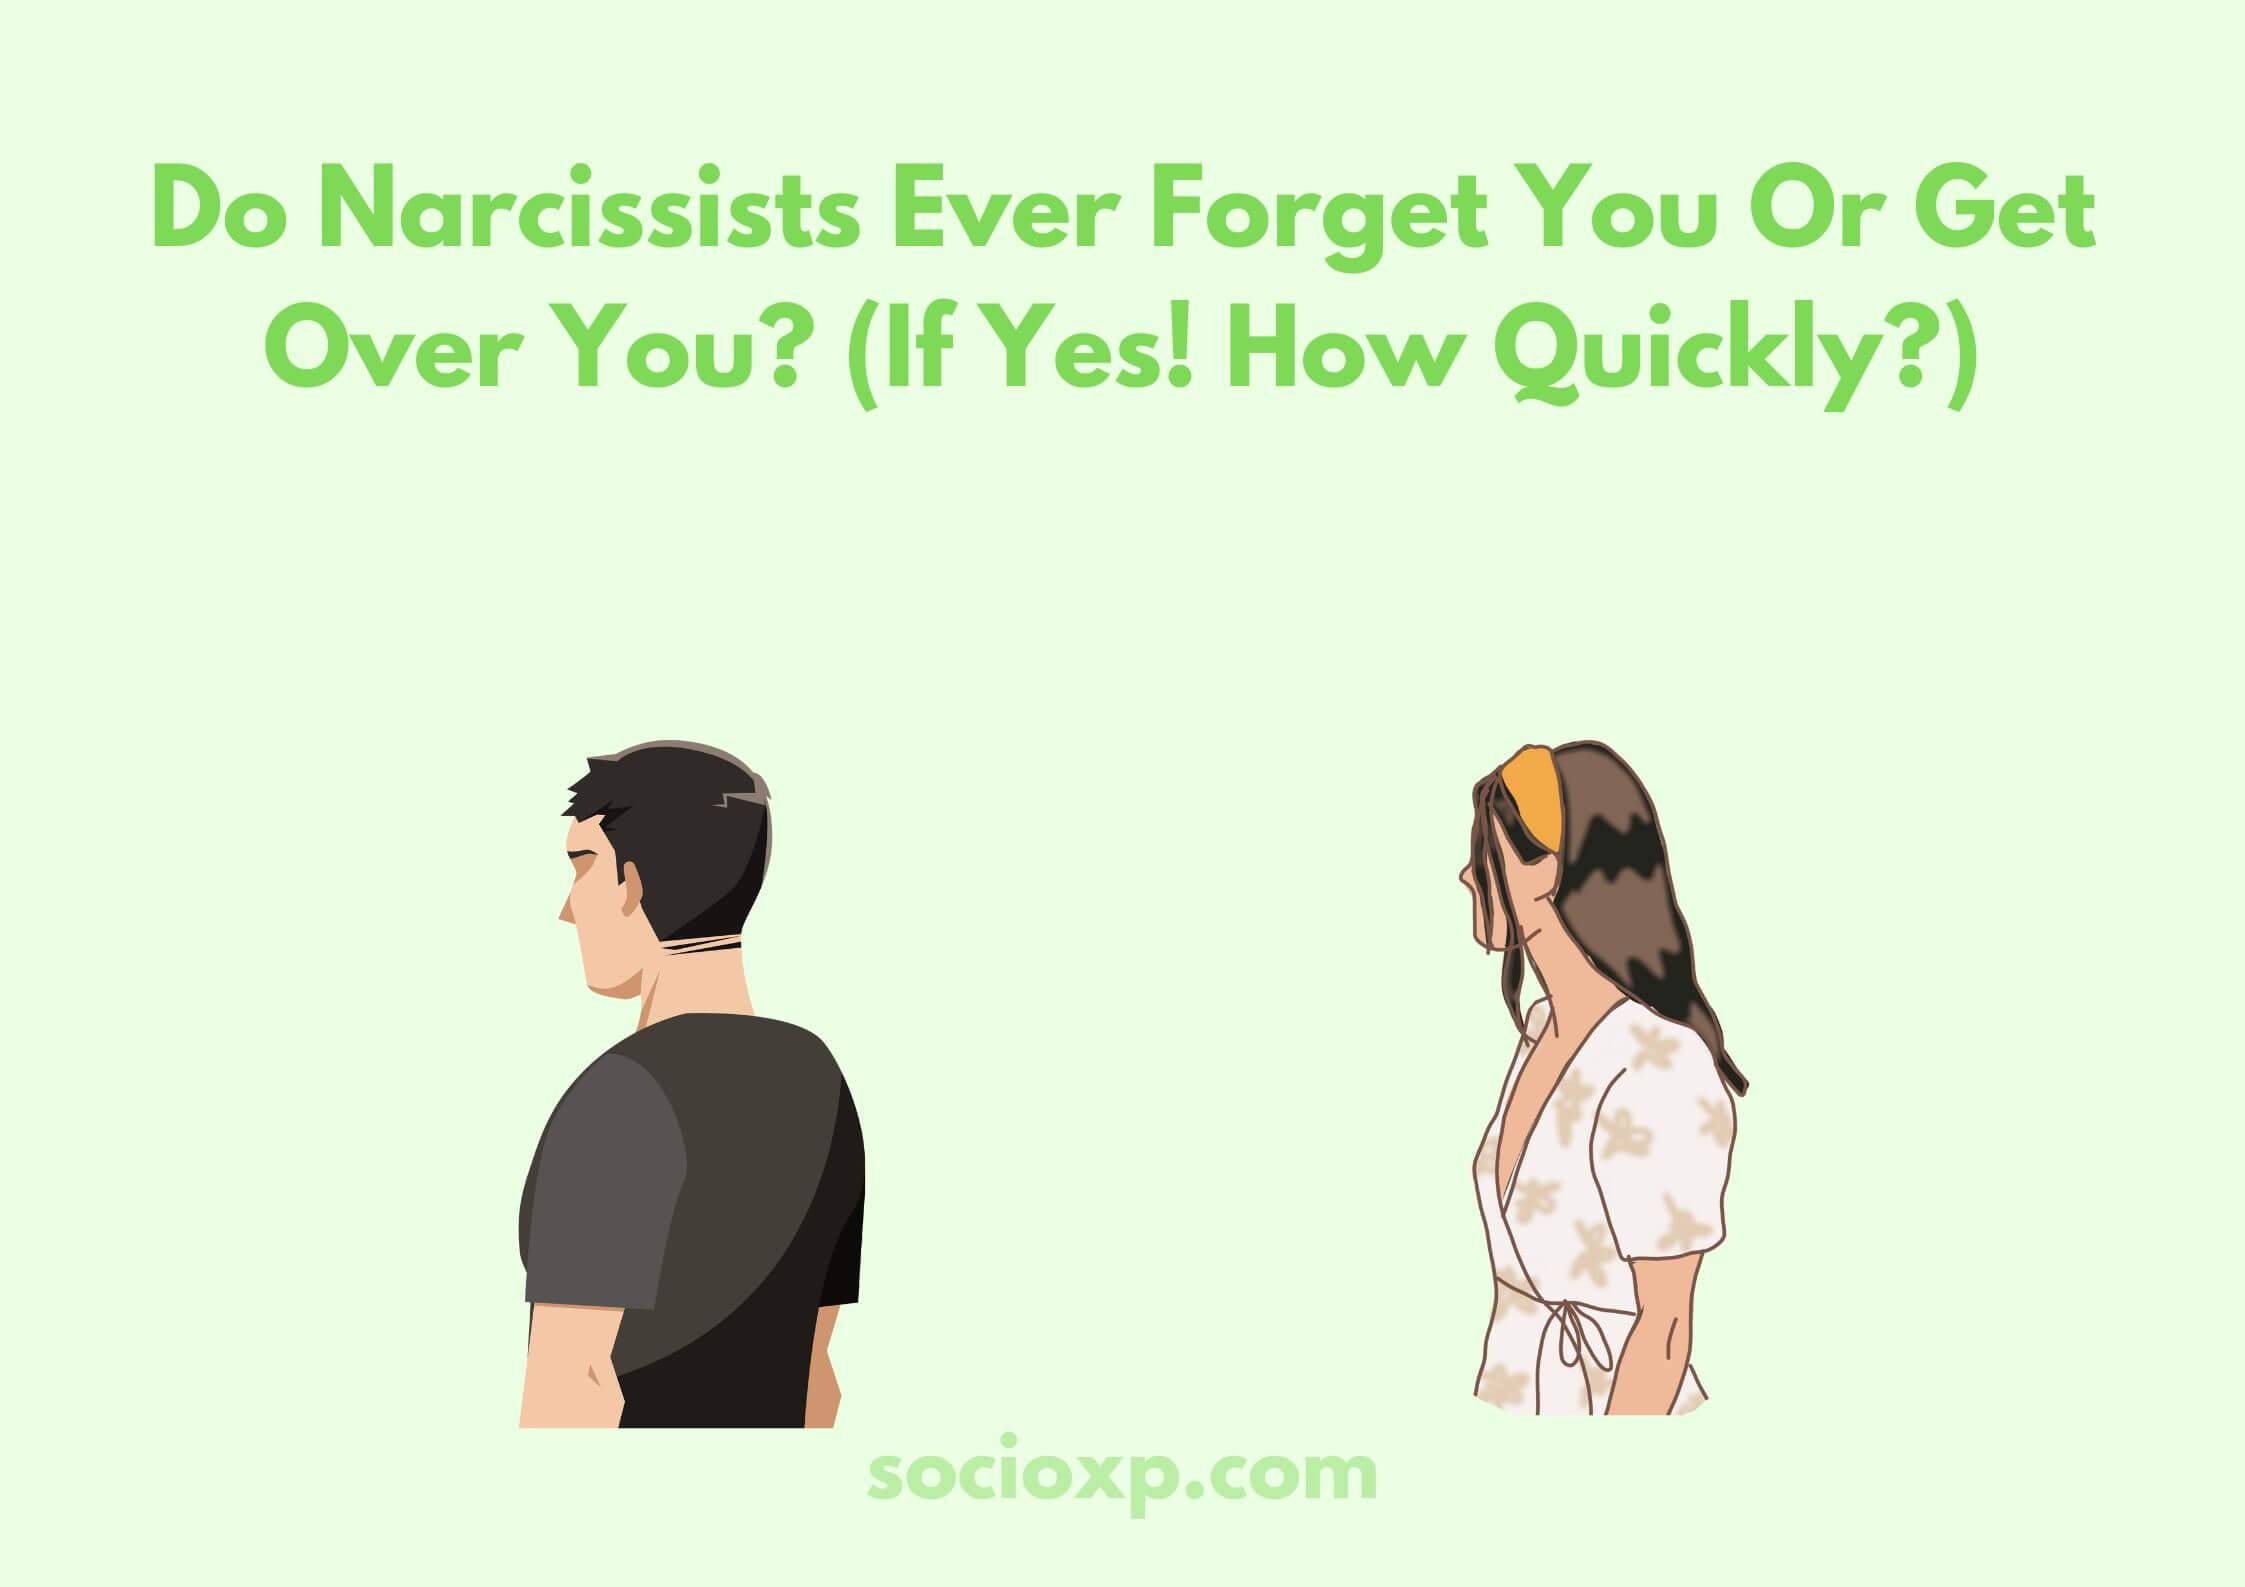 Do Narcissists Ever Forget You Or Get Over You? (If Yes! How Quickly?)